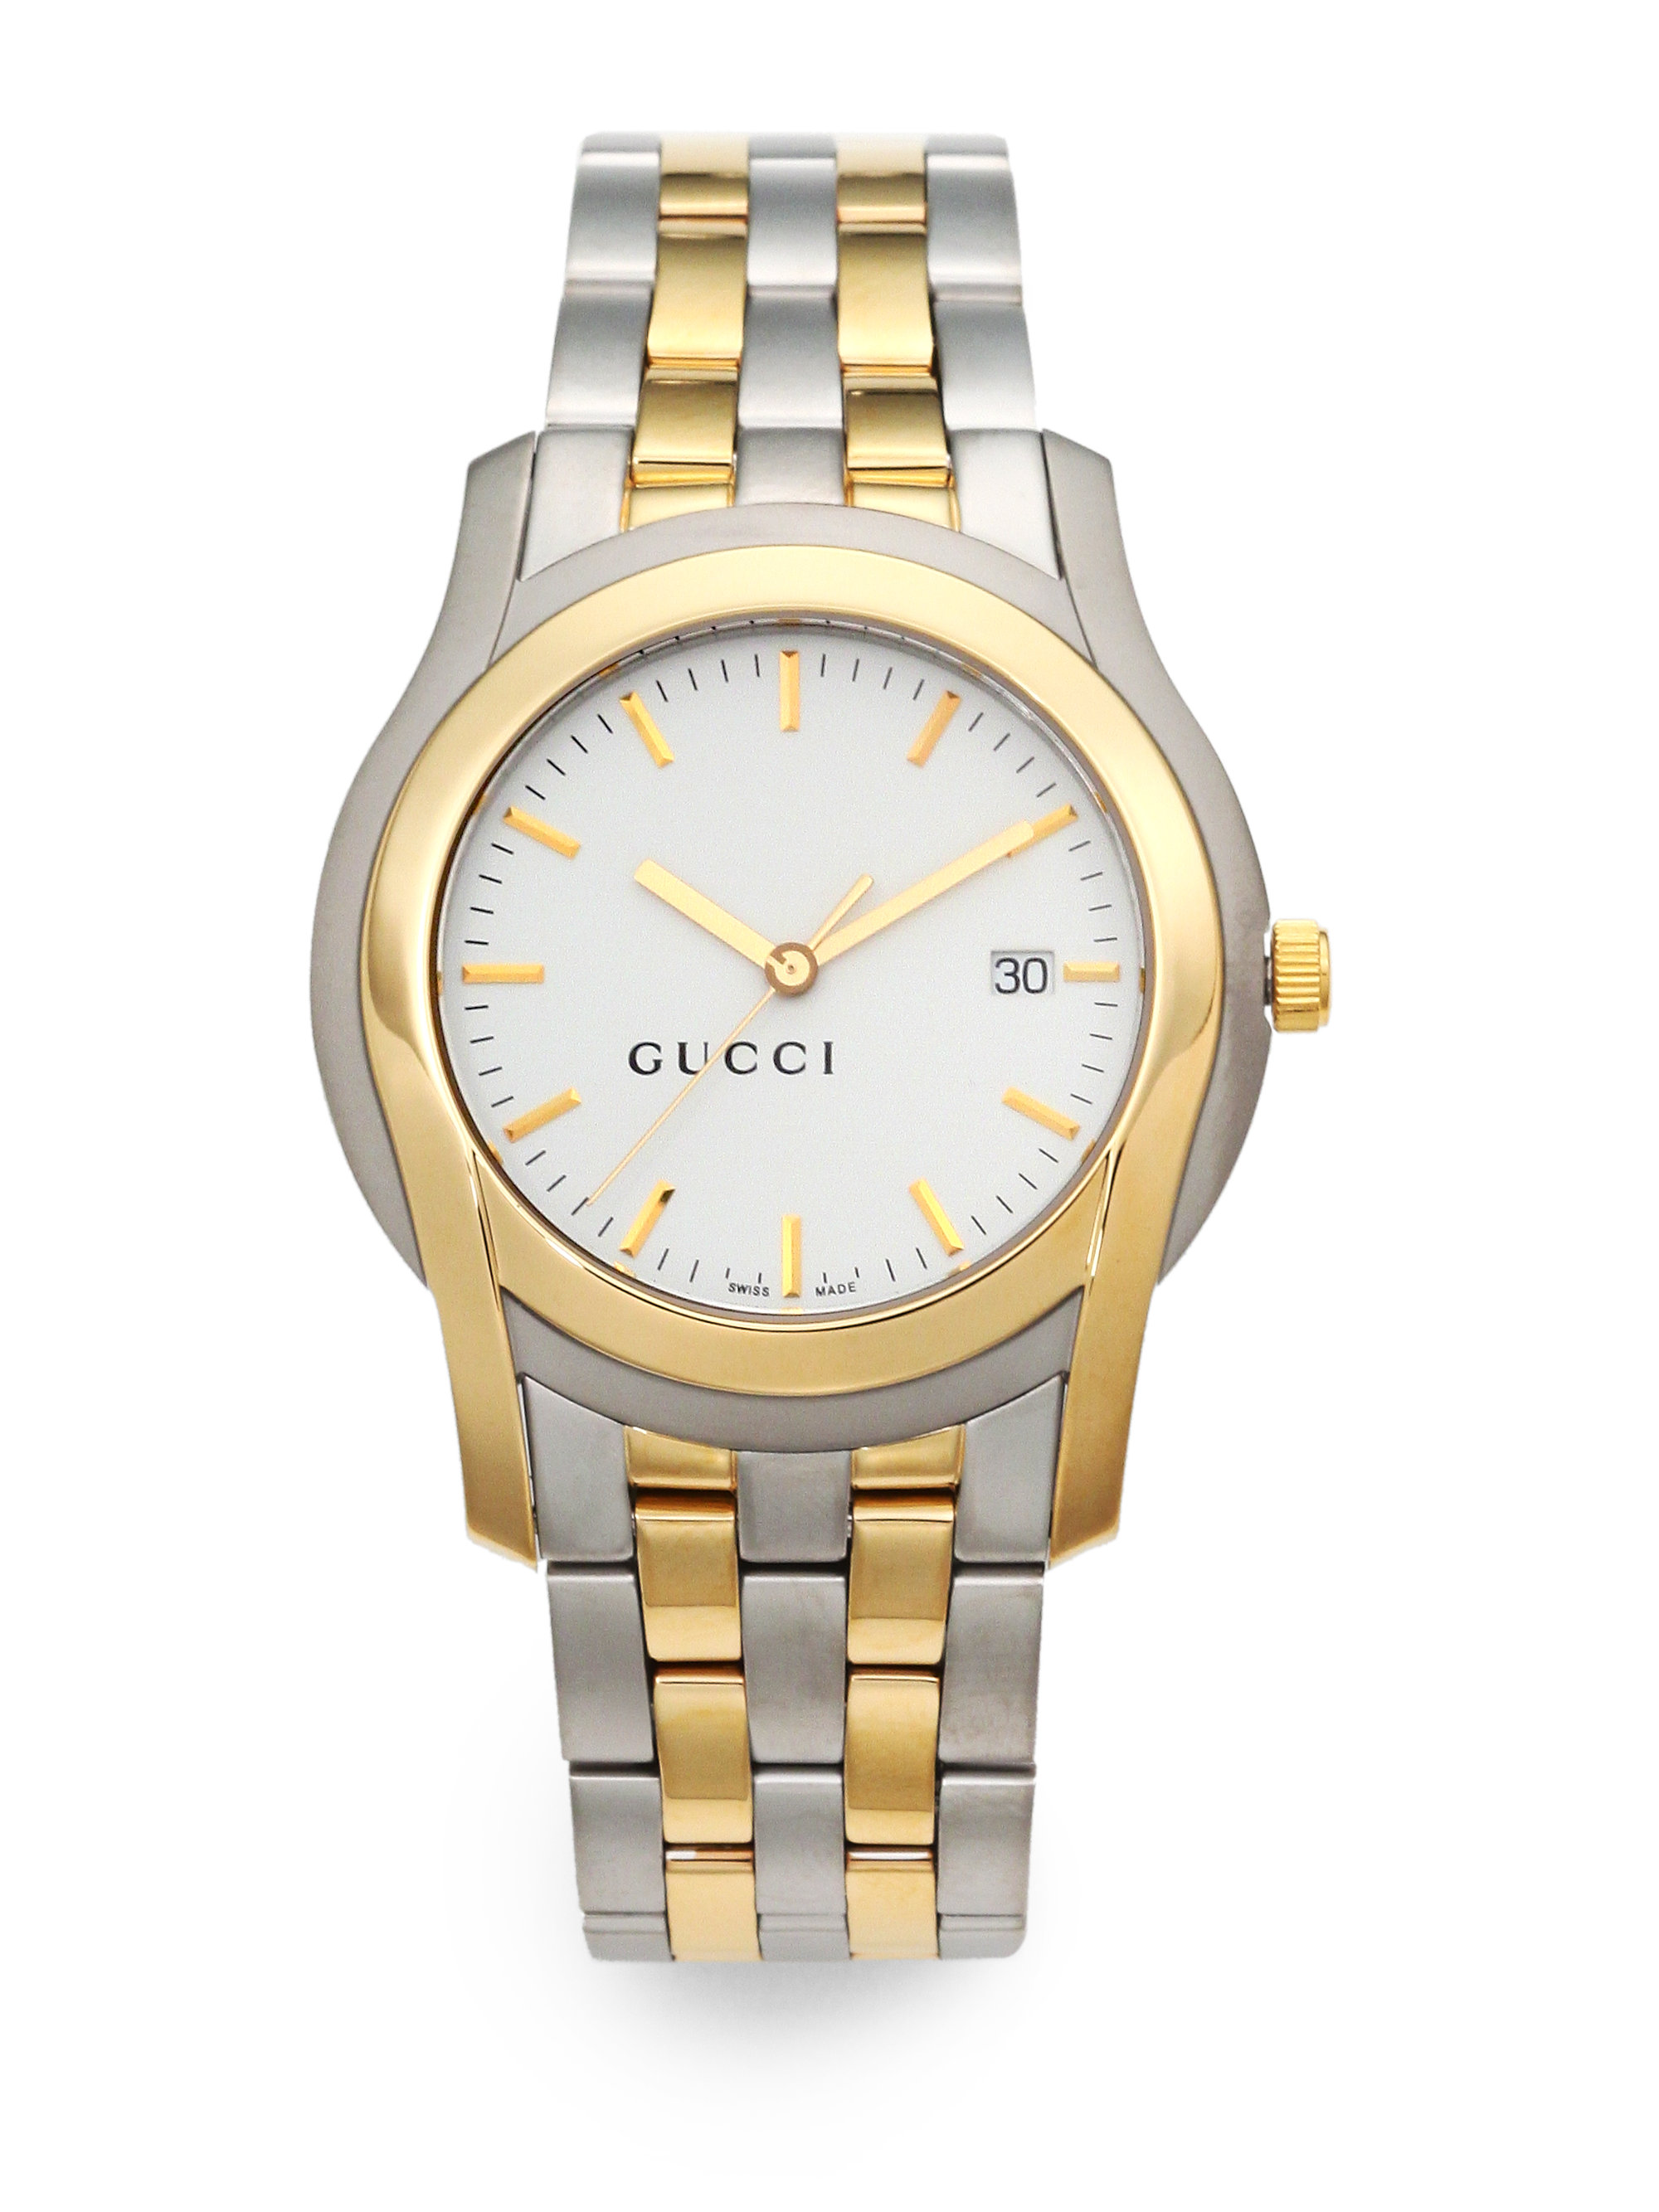 Lyst - Gucci Gclass Goldplated Stainless Steel Watch in Metallic for Men